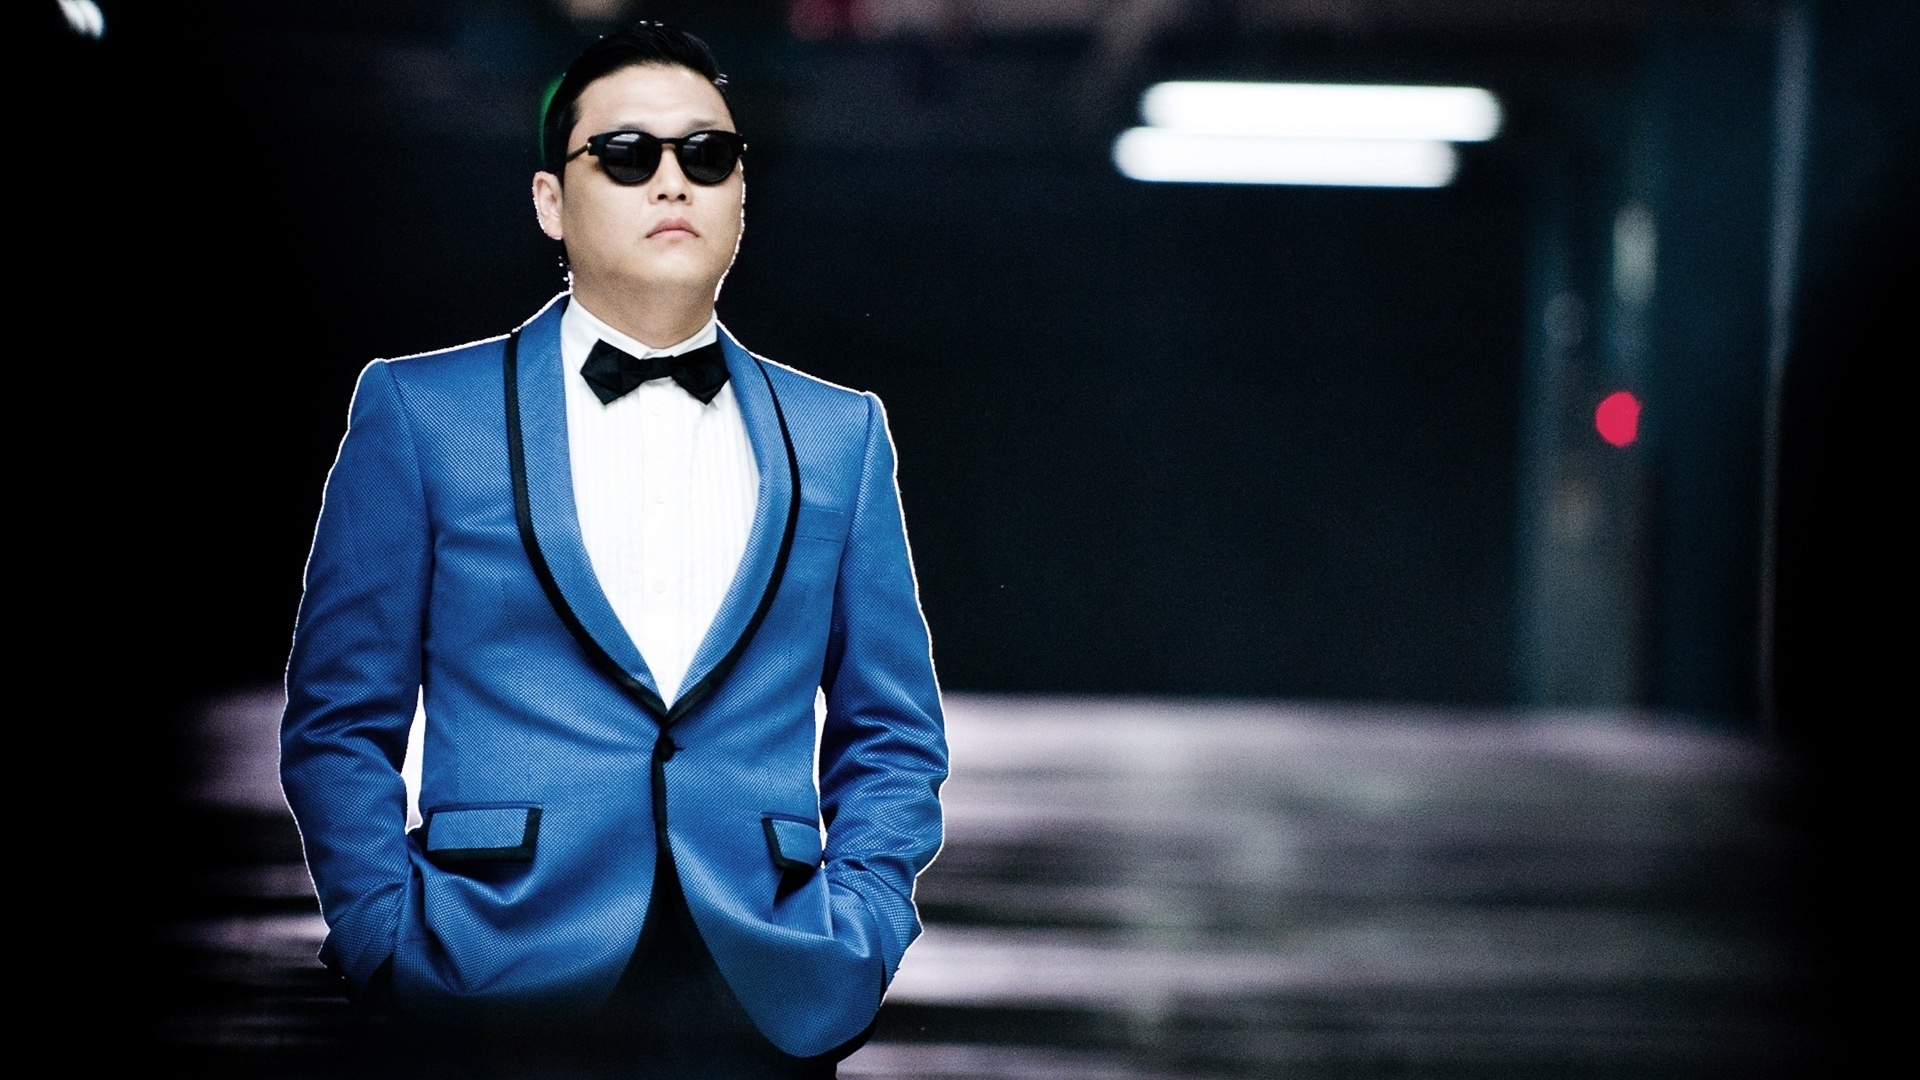 PSY for 1920 x 1080 HDTV 1080p resolution